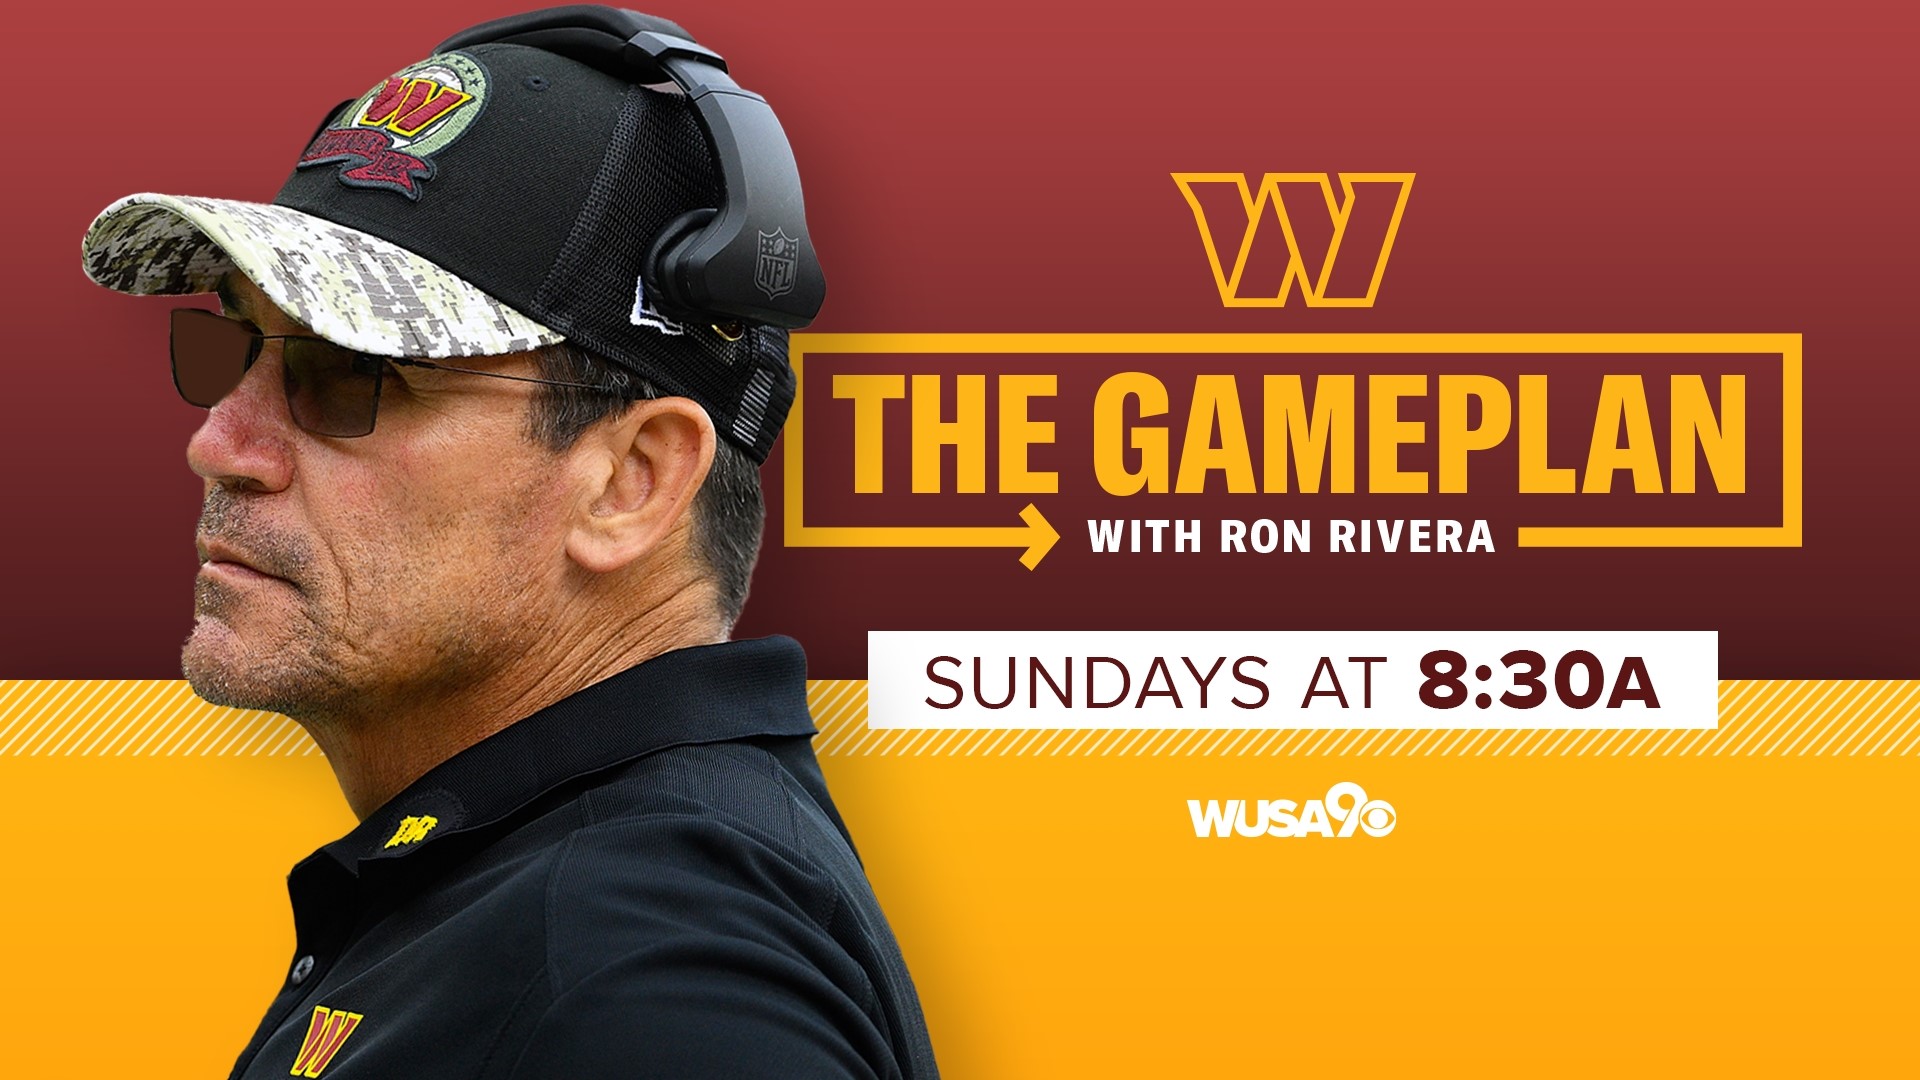 An exclusive 30-minute show with the Commanders coach airs Sundays at 8:30 a.m. during football season, breaking down game tape and analyze player performance.